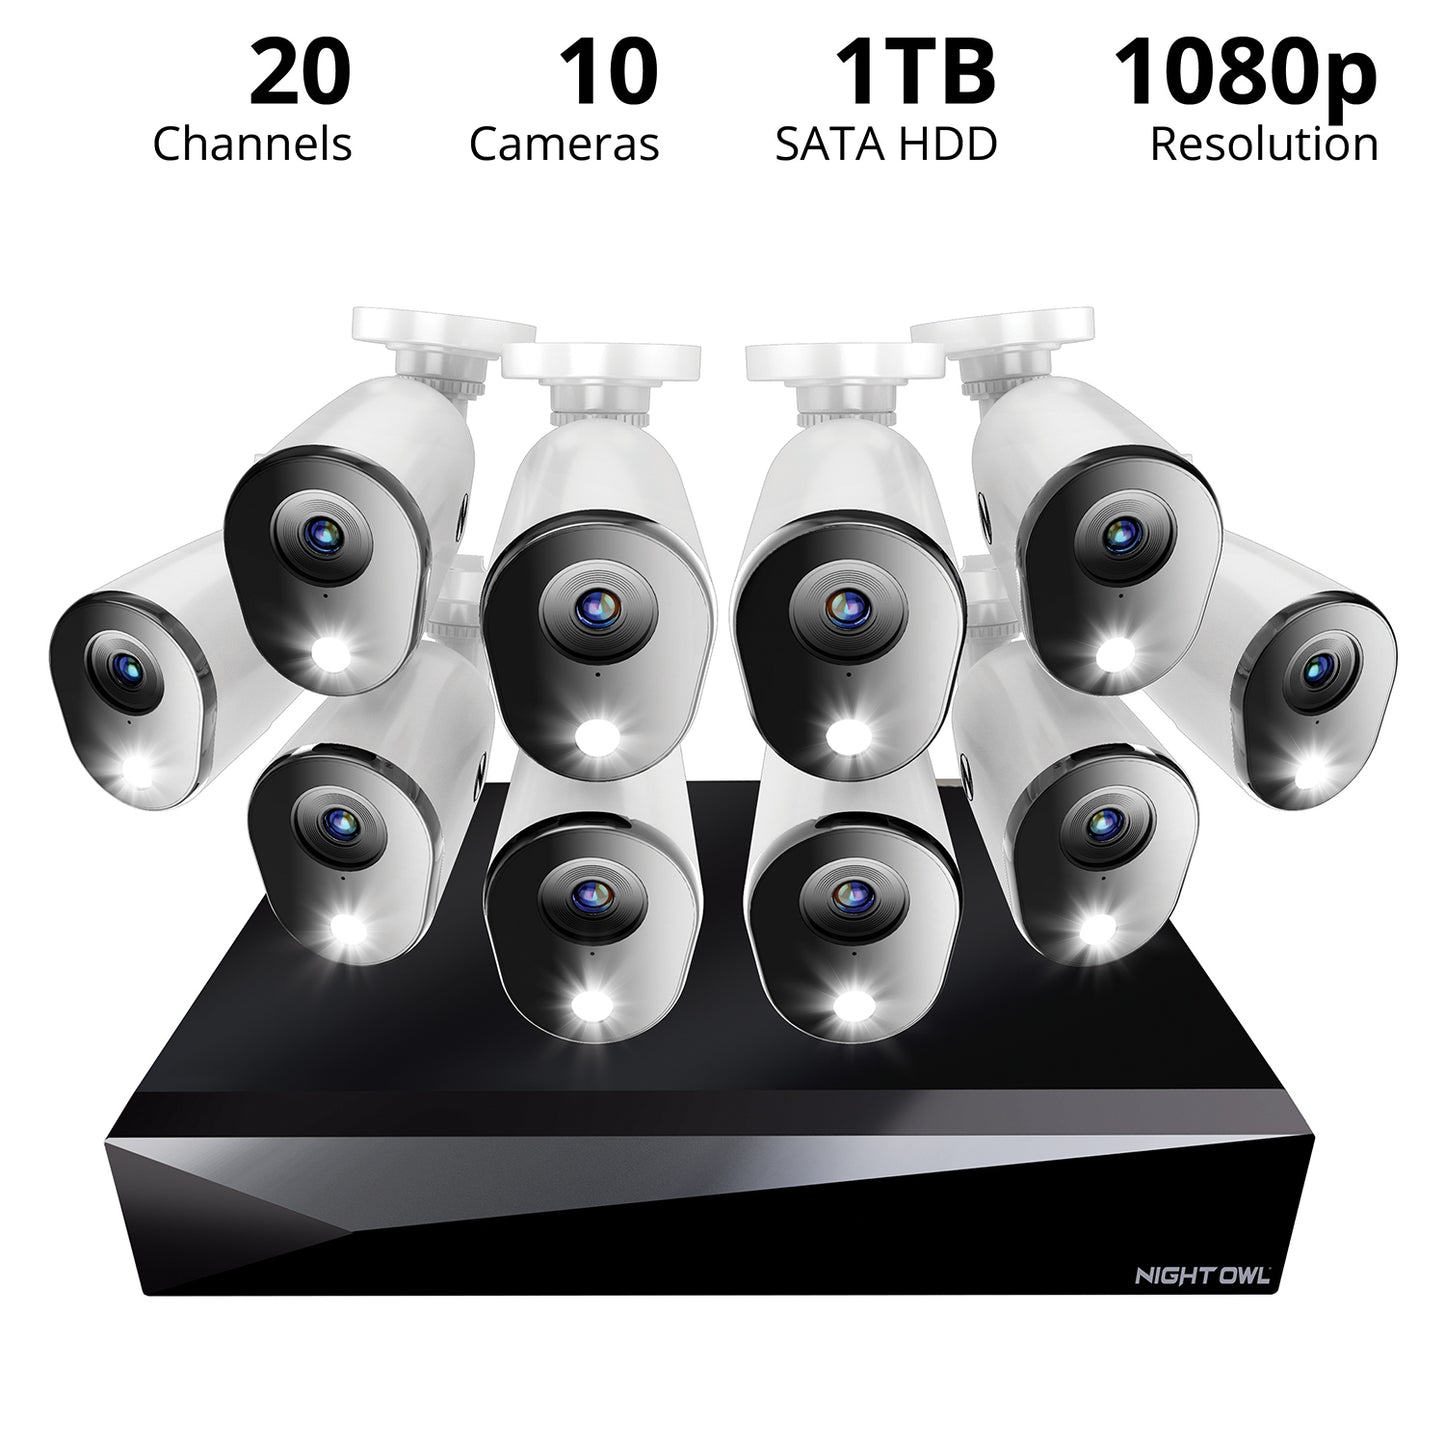 2-Way Audio 20 Channel DVR Security System with 1TB Hard Drive and 10 Wired 1080p Deterrence Cameras